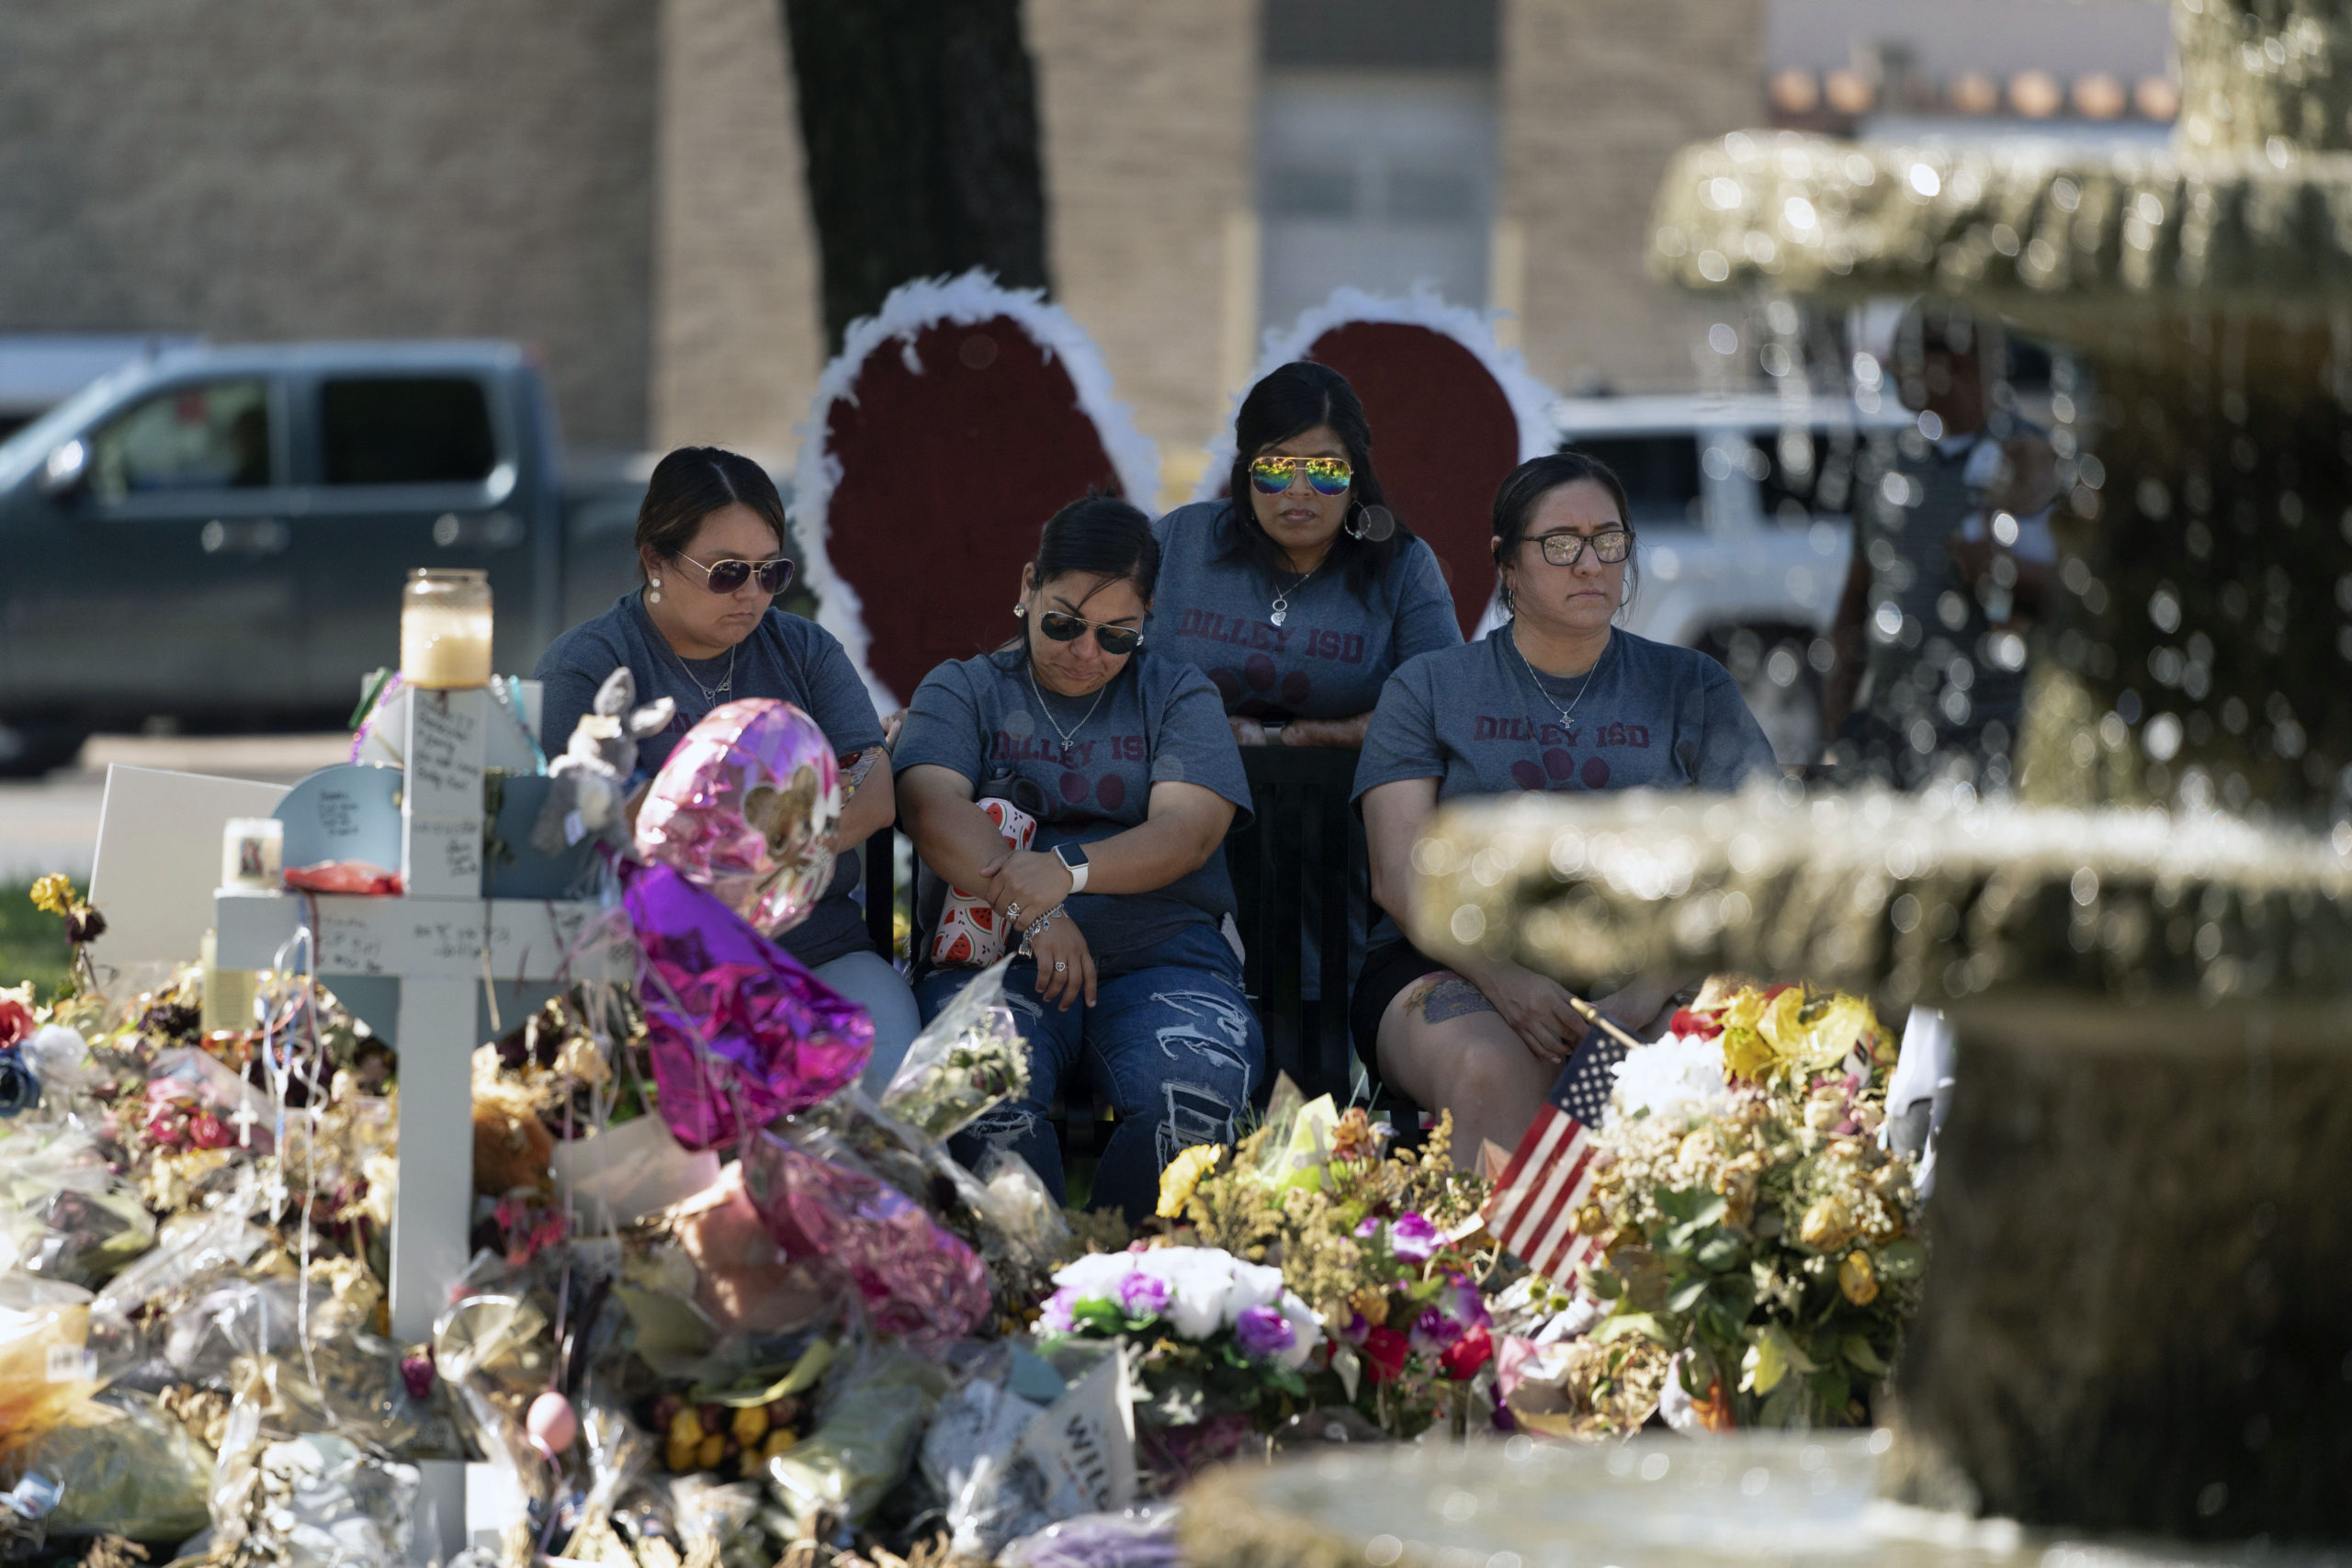 A group of teachers visiting from Dilley, Texas, view a memorial honoring the victims killed in the shooting in Uvalde, Texas, Friday, June 3, 2022.